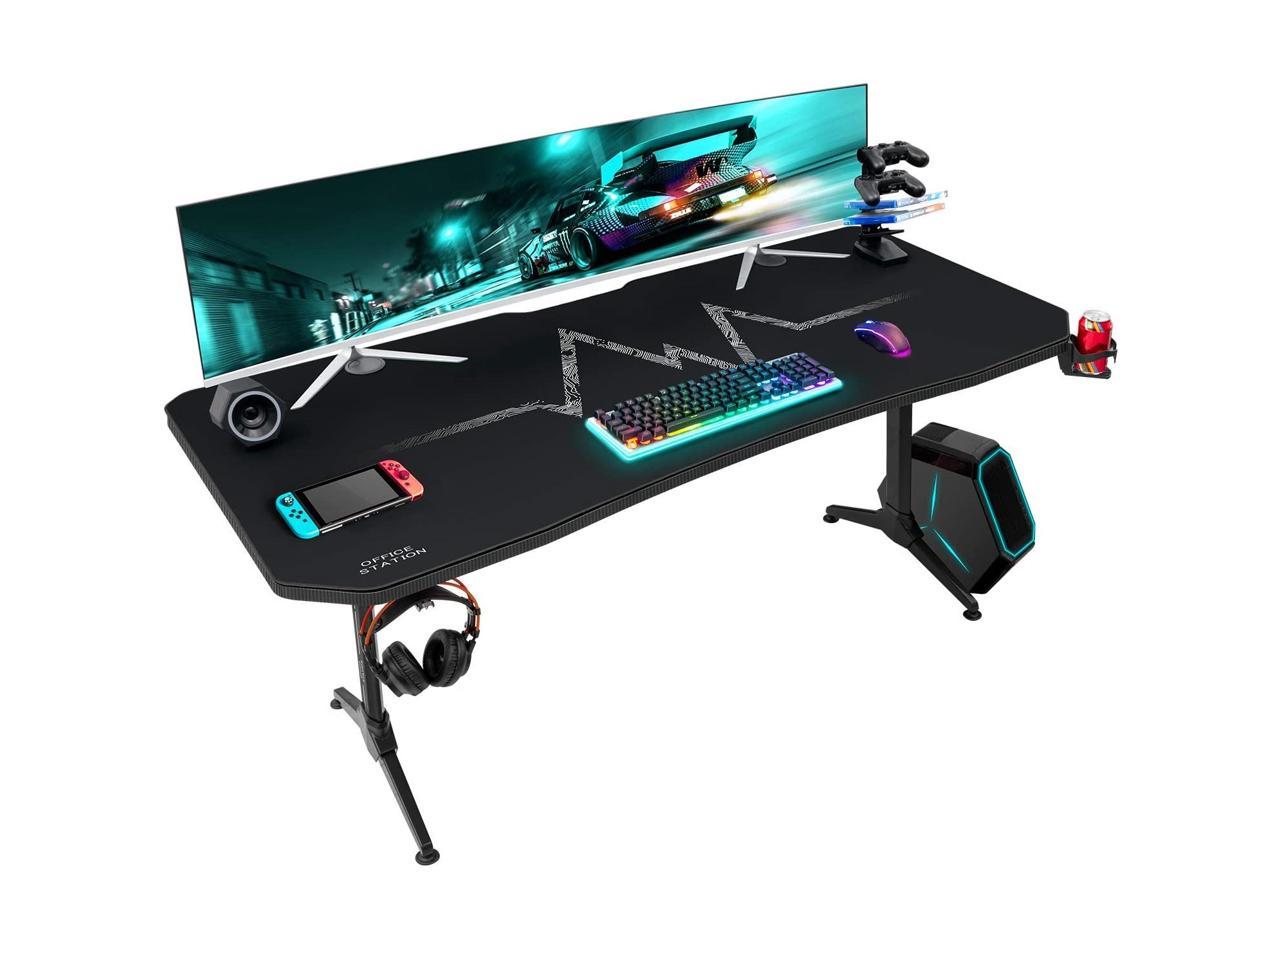 count up Asser Pogo stick jump Furmax 63 Inch Gaming Desk Y-Shaped PC Computer Table with Carbon Fiber  Surface Free Mouse Pad Home Office Desk Gamer Table with Game Handle Rack  Headphone Hook and Cup Holder (Black) -